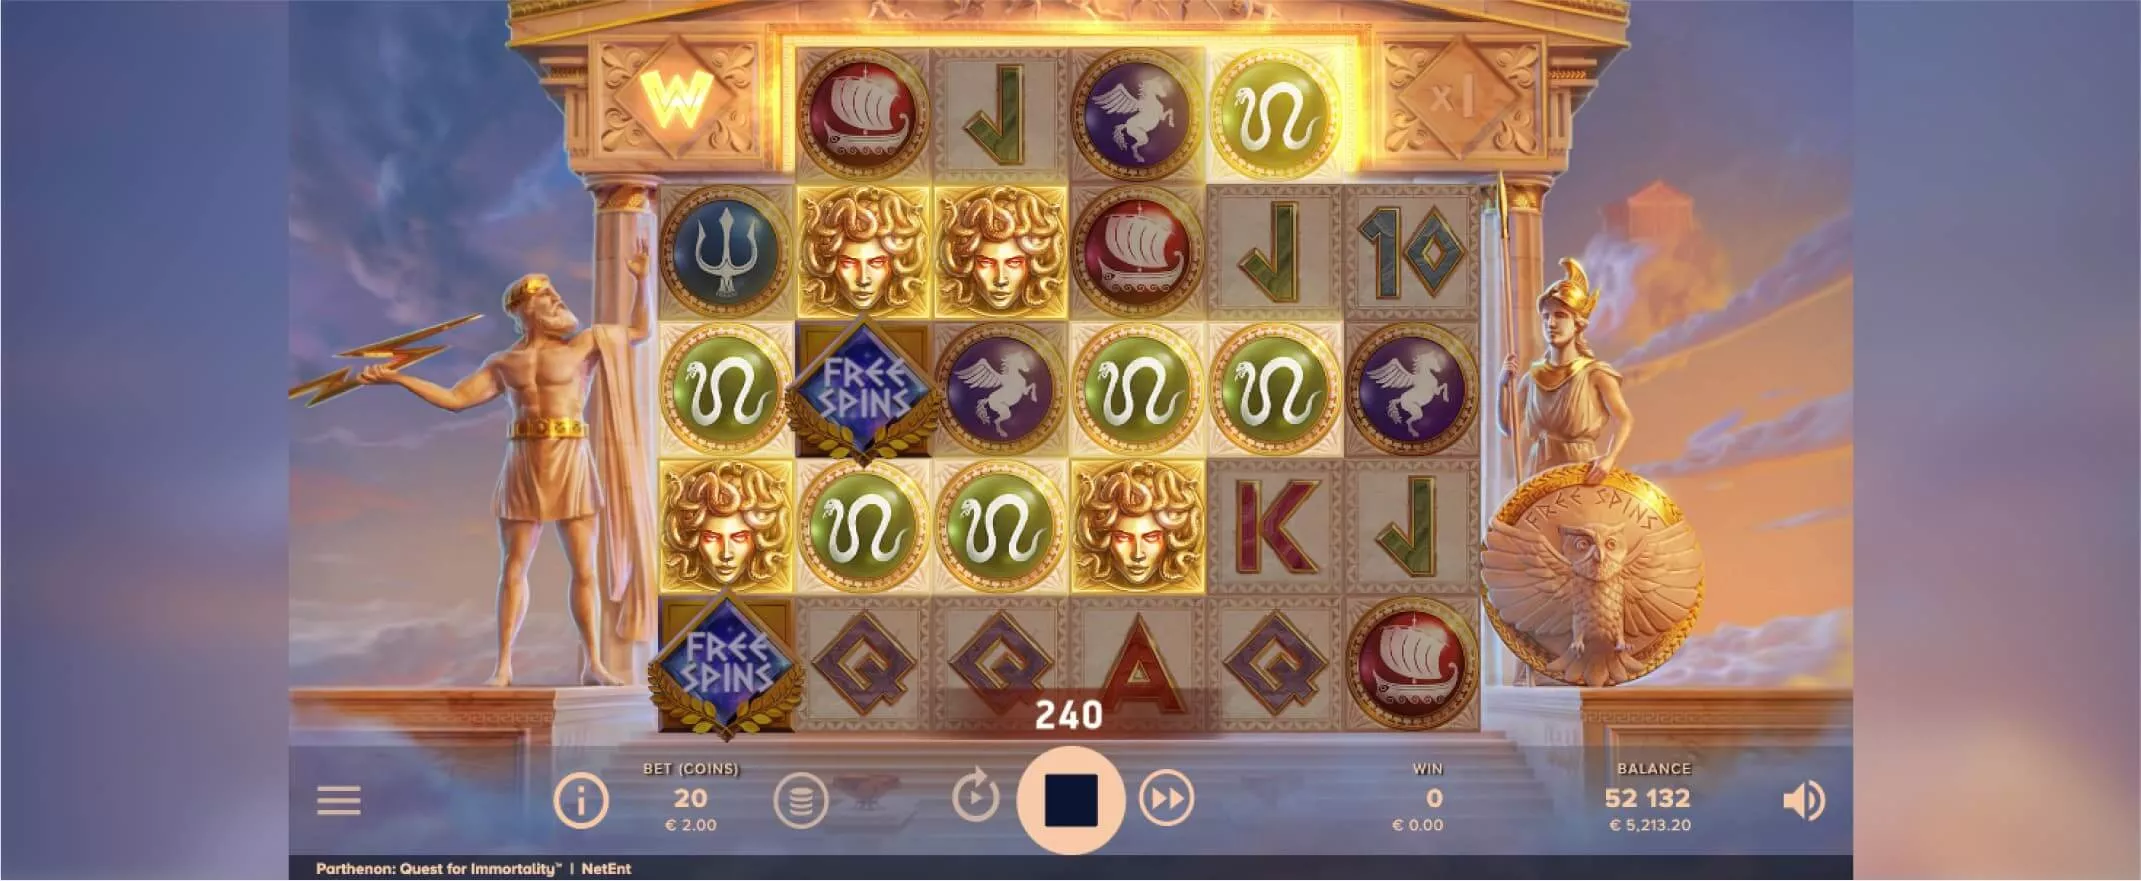 Parthenon Quest for Immortality slot screenshot of the reels